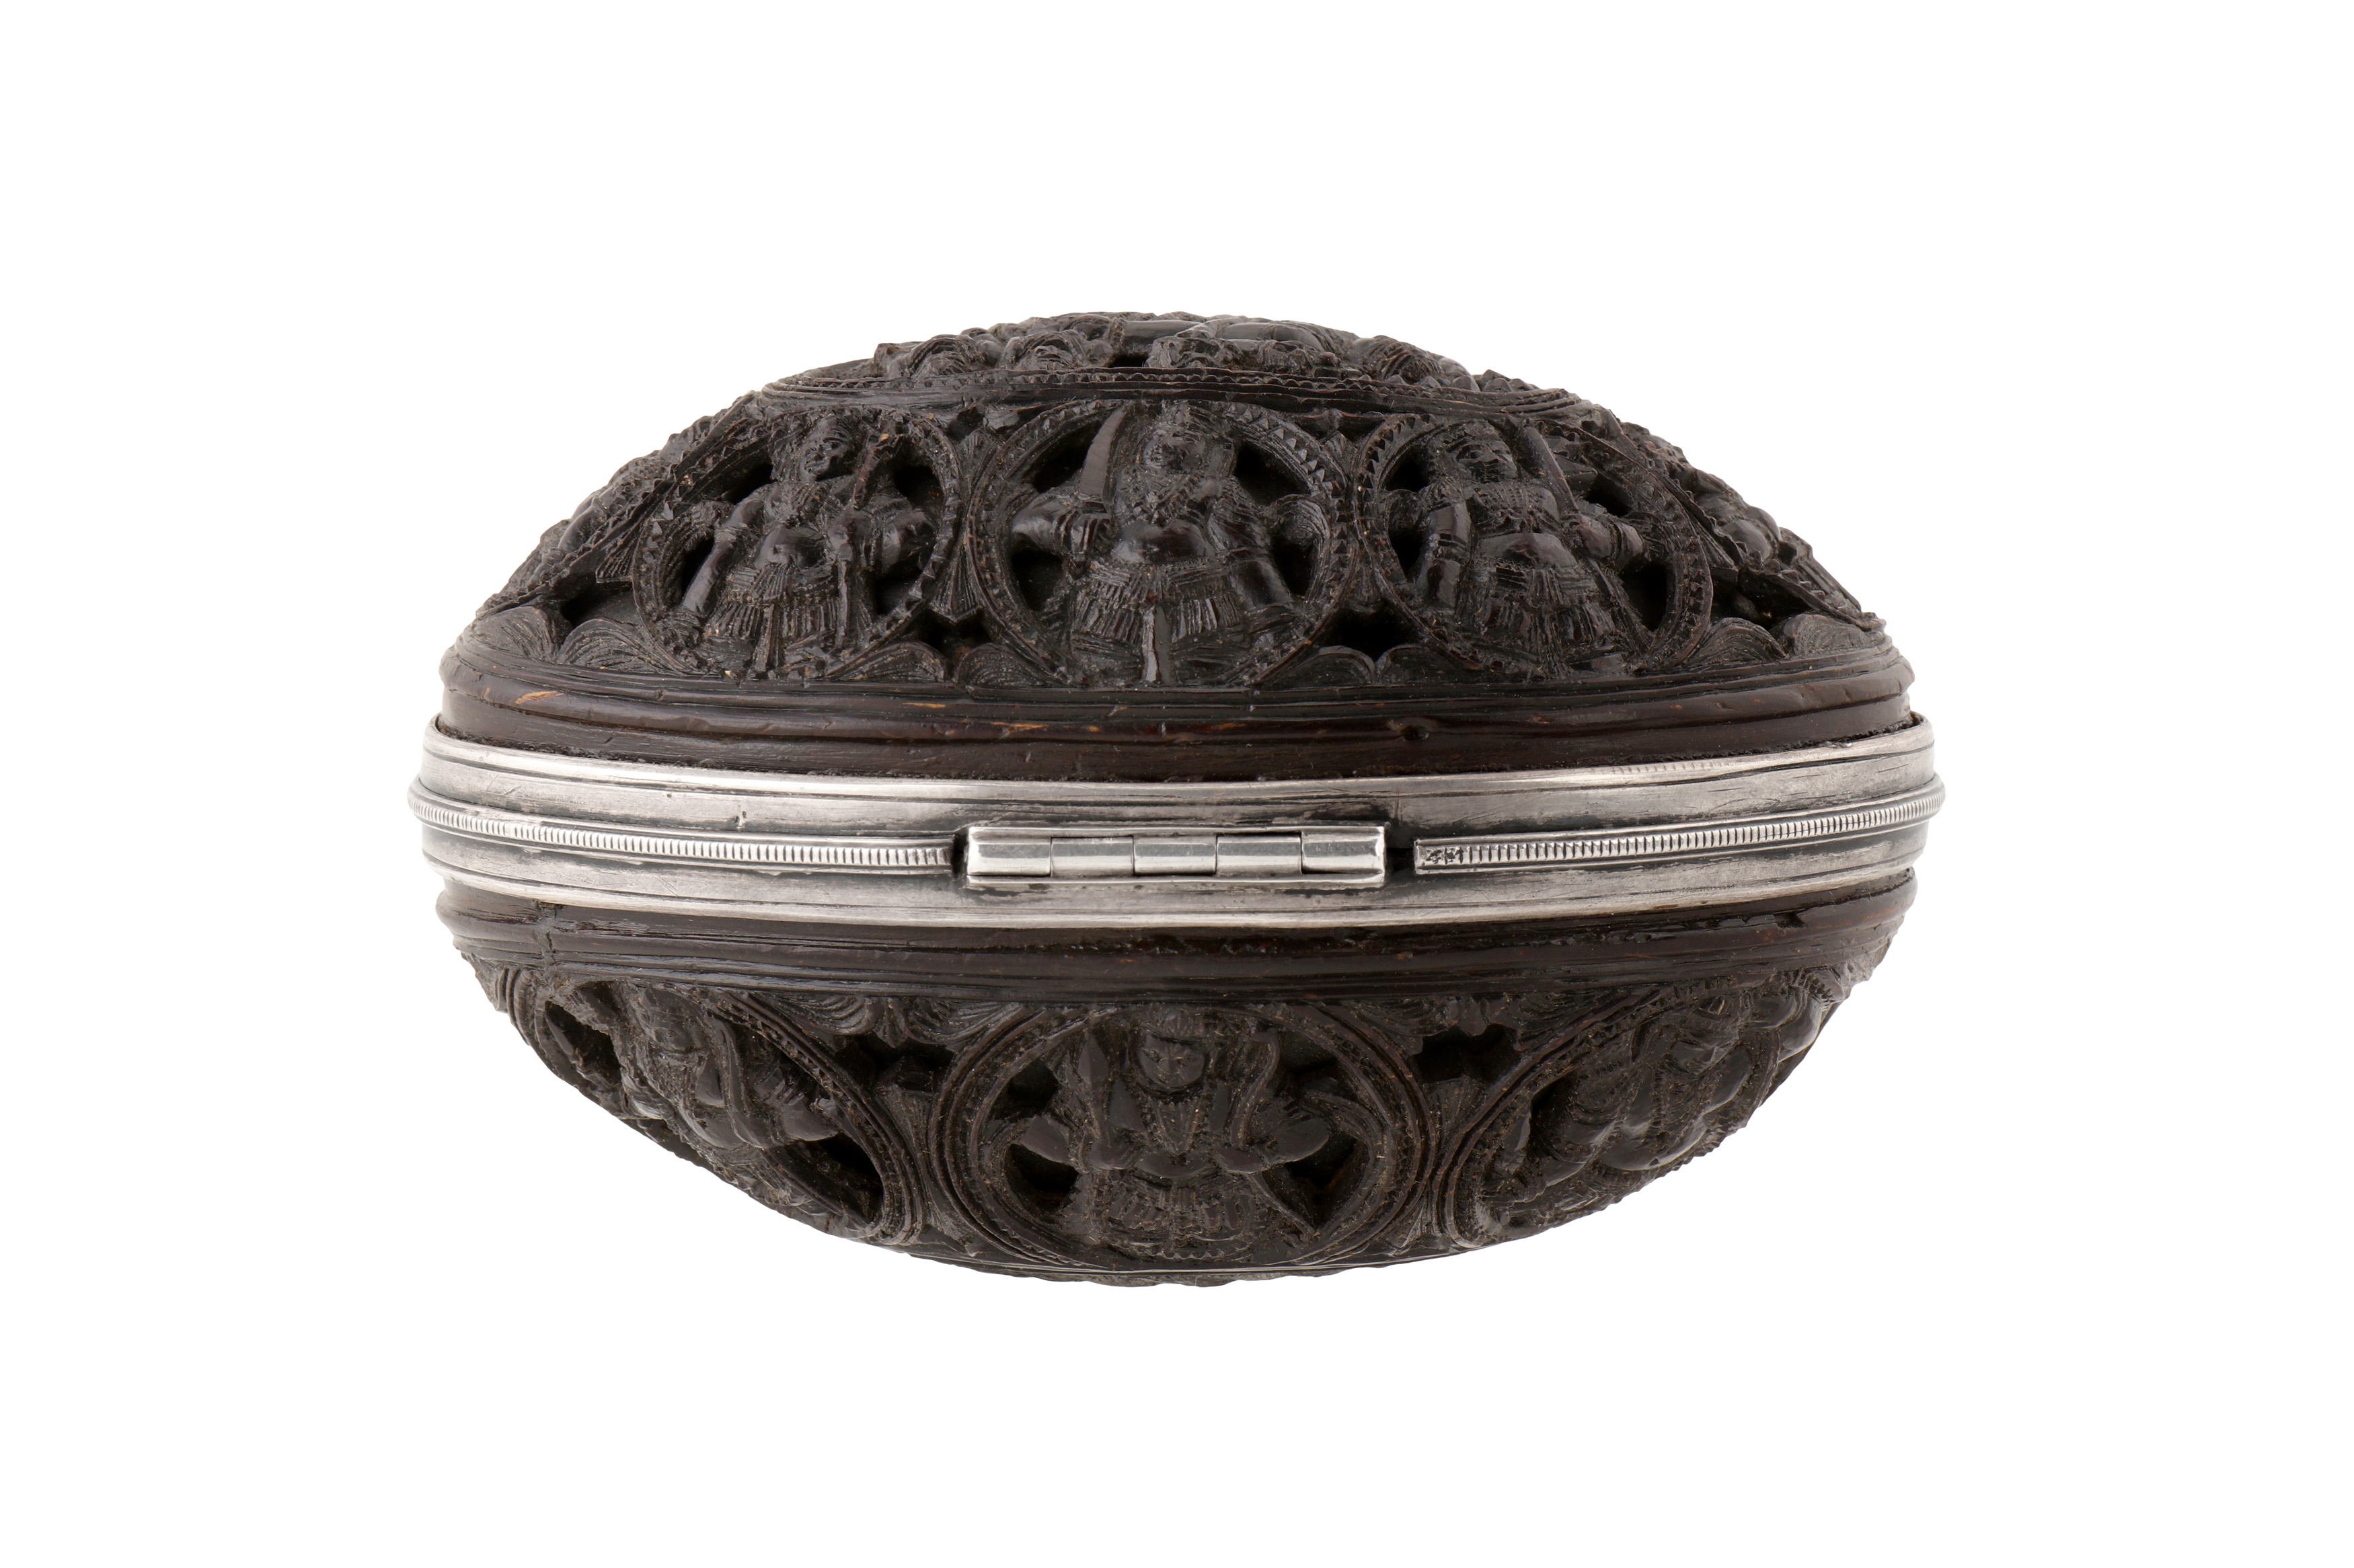 A VERY FINE 18TH-19TH CENTURY SOUTH INDIAN OR SINHALESE COCONUT MOUNTED SILVER BOX - Image 4 of 4